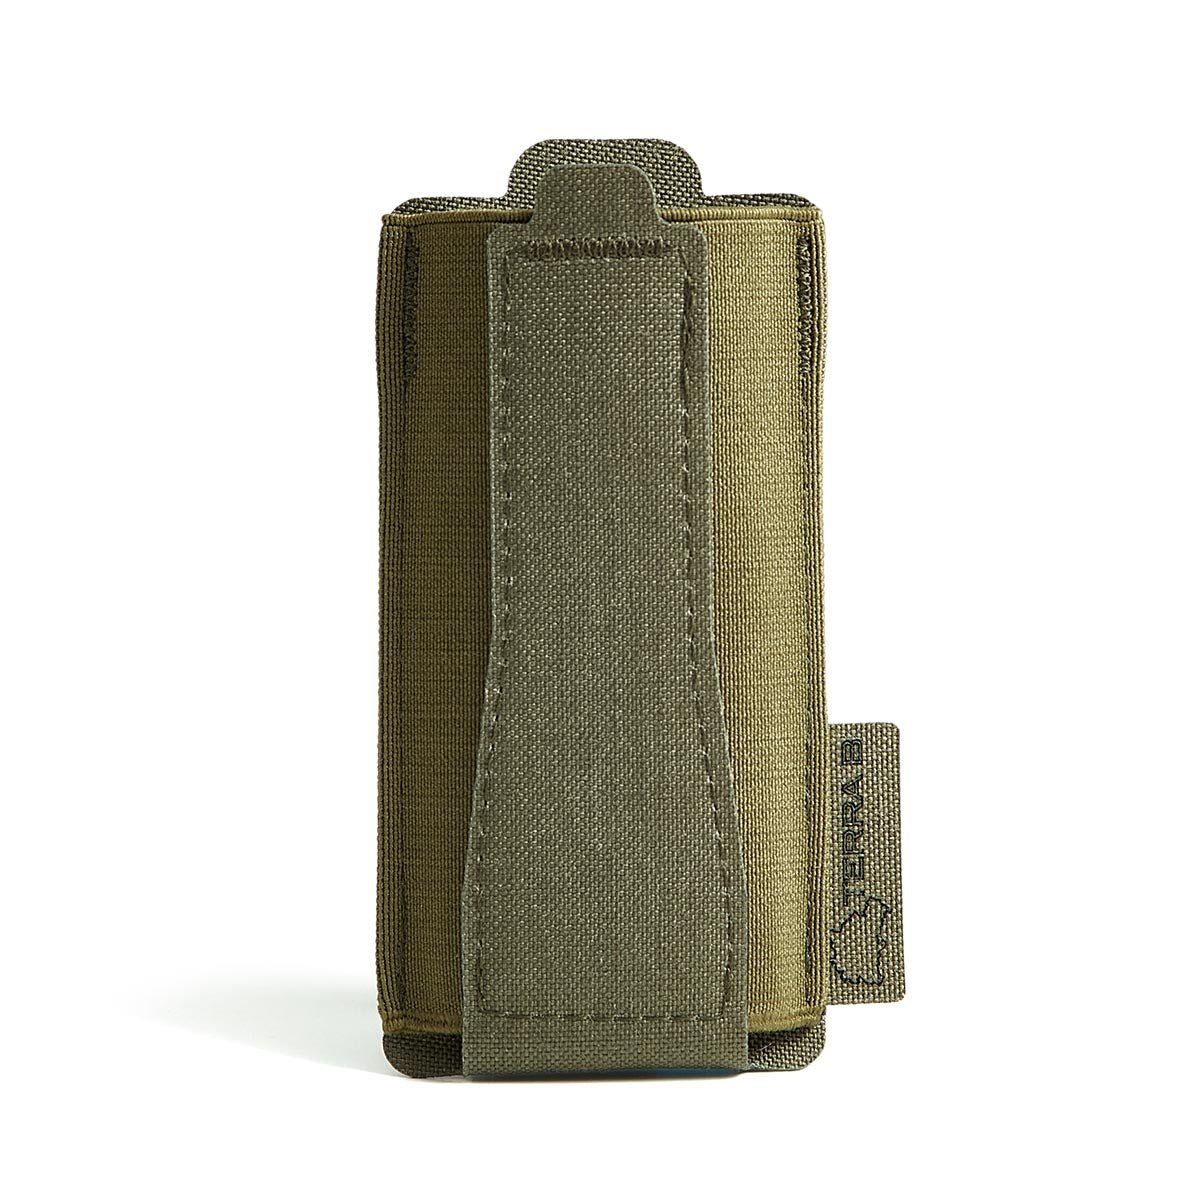 TERRA B Discreet Pouch Small Molle Olive